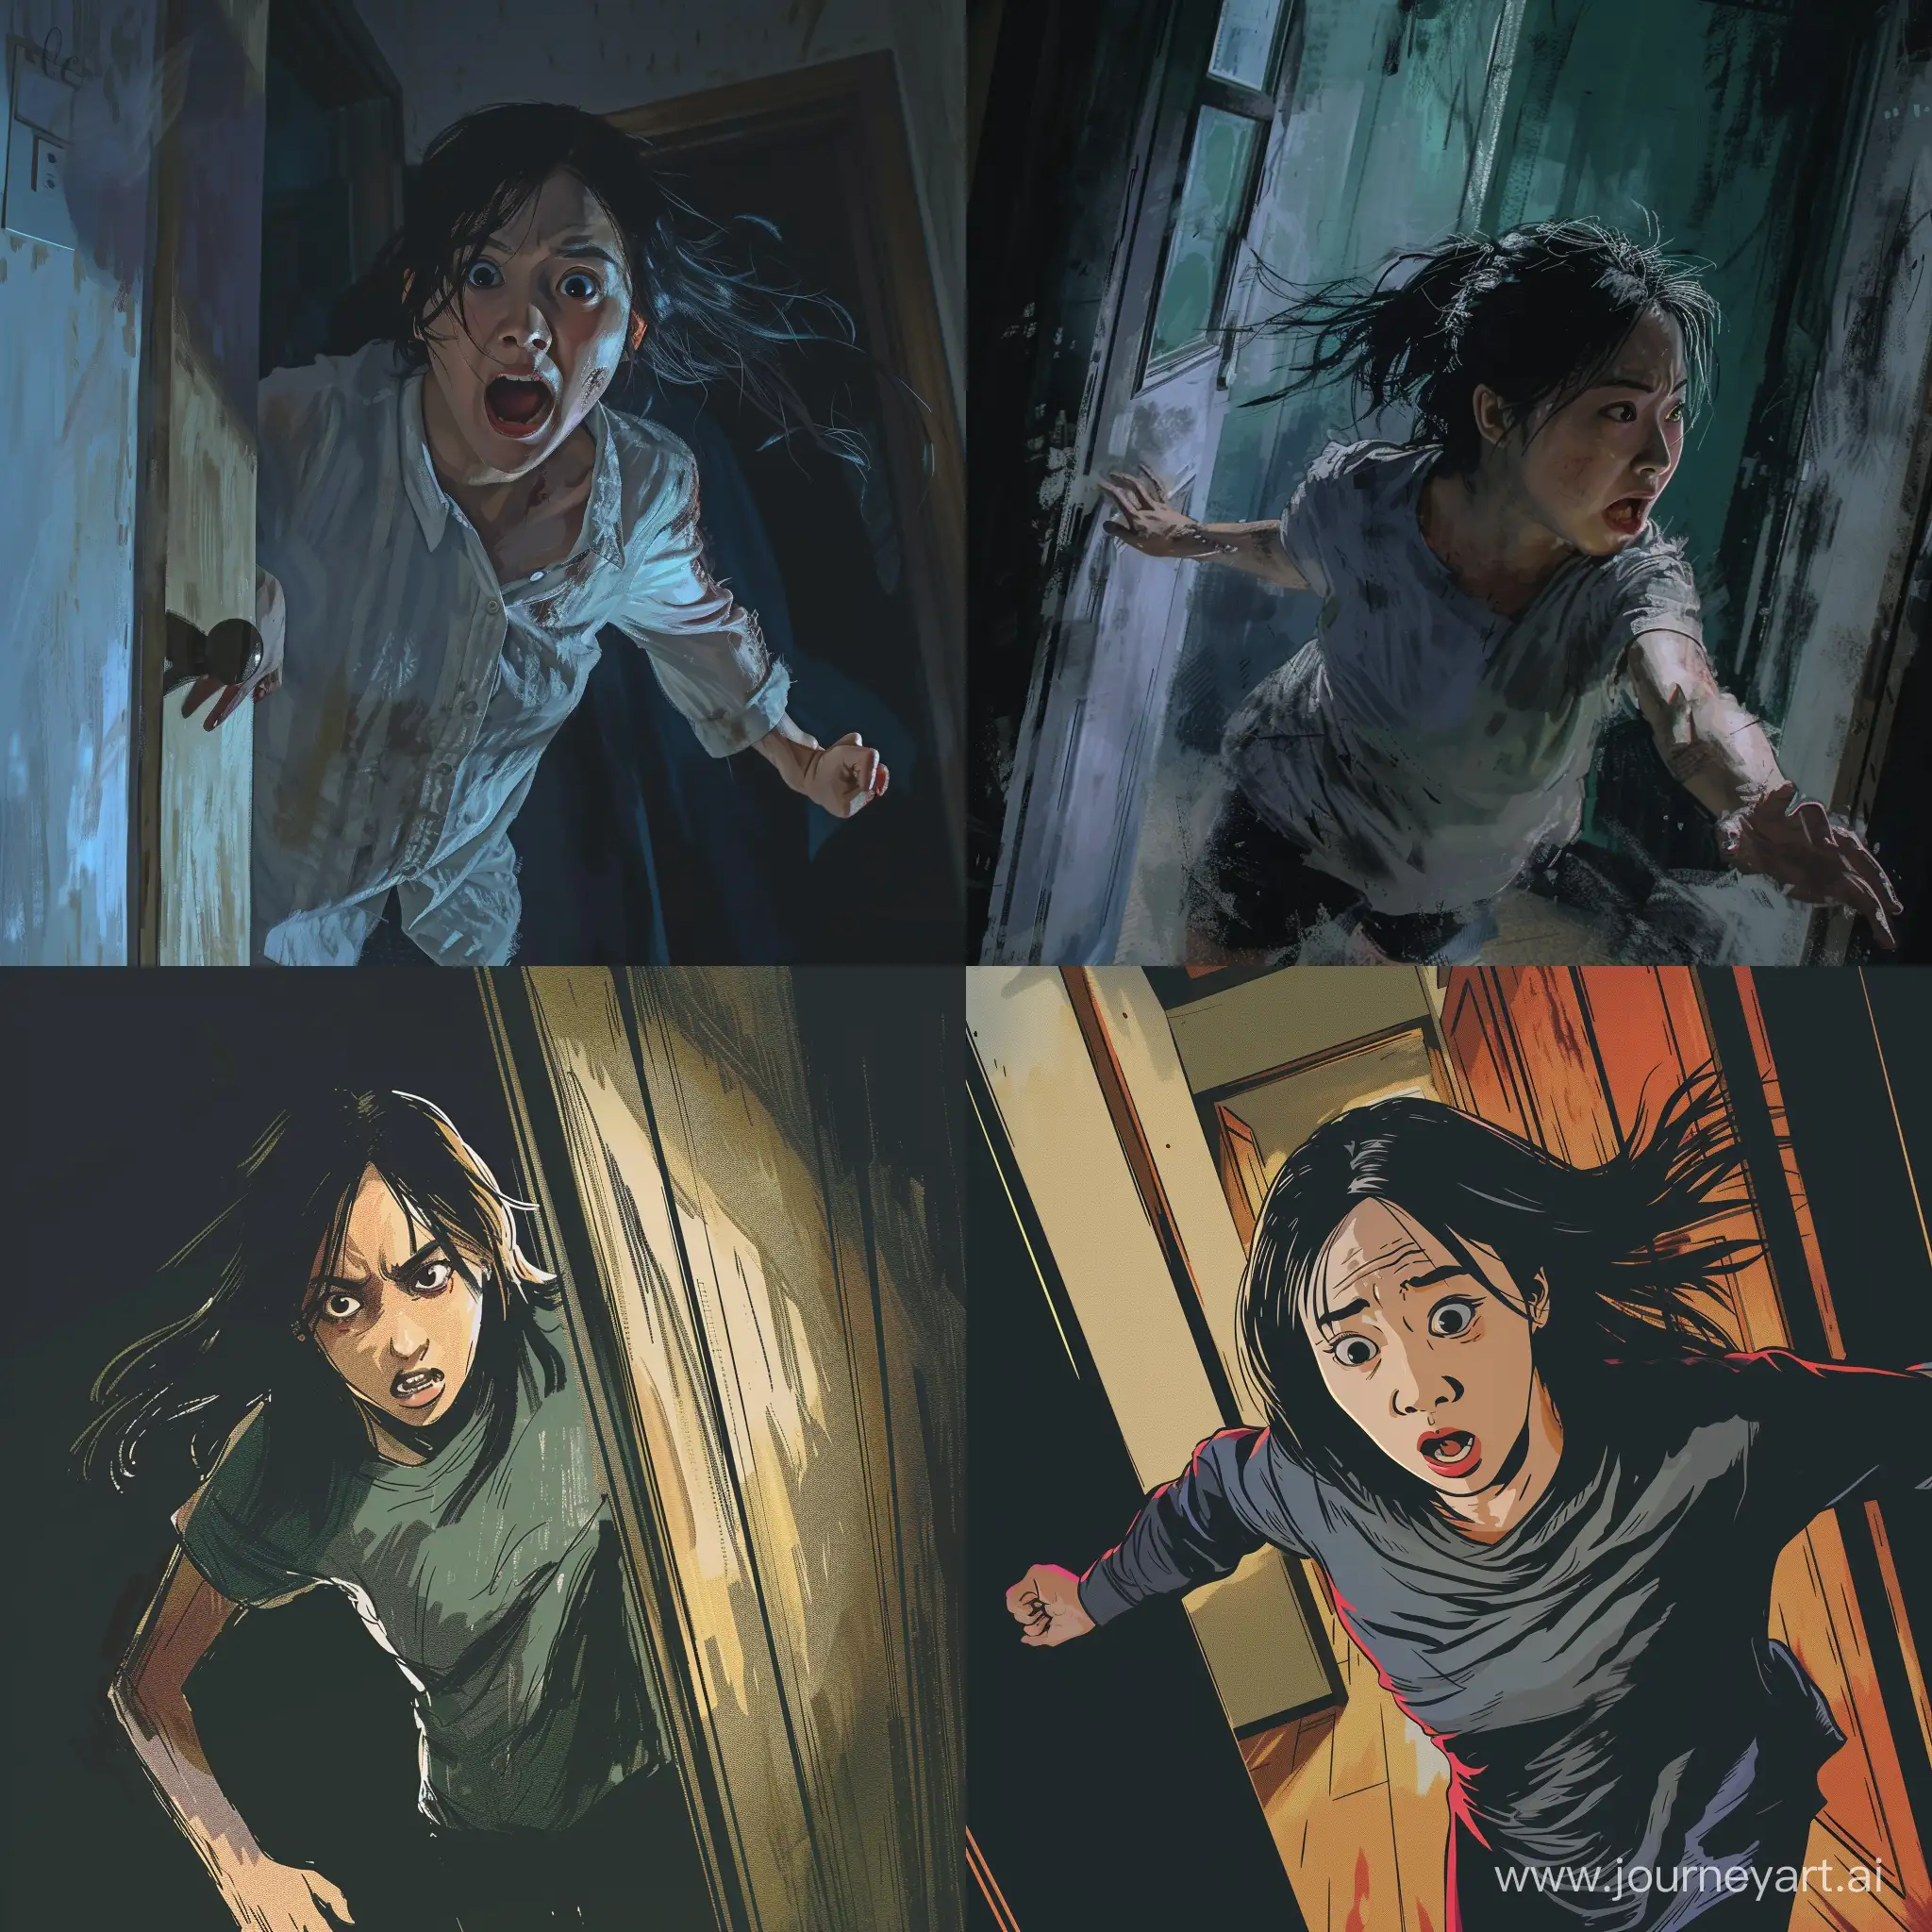 https://s.mj.run/CT4Gm0xZrw0 A Chinese woman 20 years old rushed into the room panorama, expression panic positive perspective, close-up, Horror scene, grim, dark, 8K, graphic novel sketch, graphic novel style, 2D effect, flat color, plain color, dark painting style, Horror Thriller,mystery novel --ar 1:1